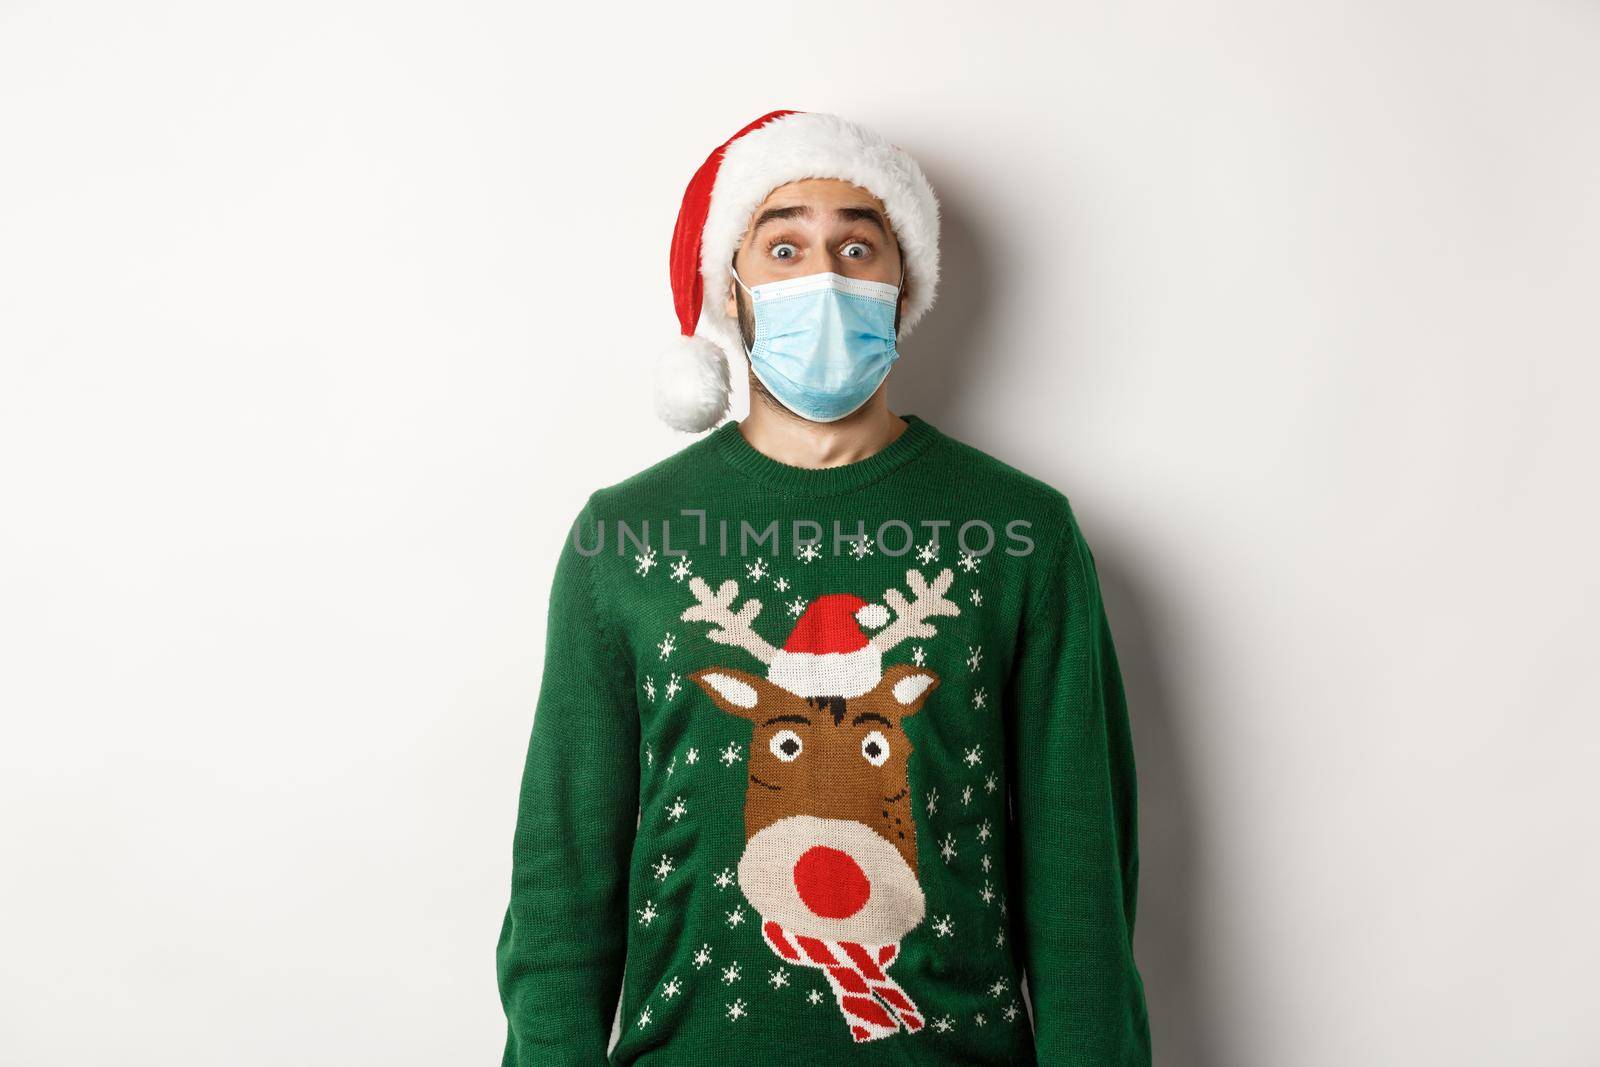 Christmas during pandemic, covid-19 concept. Surprised guy in medical mask, Santa hat and sweater celebrating New Year party, standing over white background.